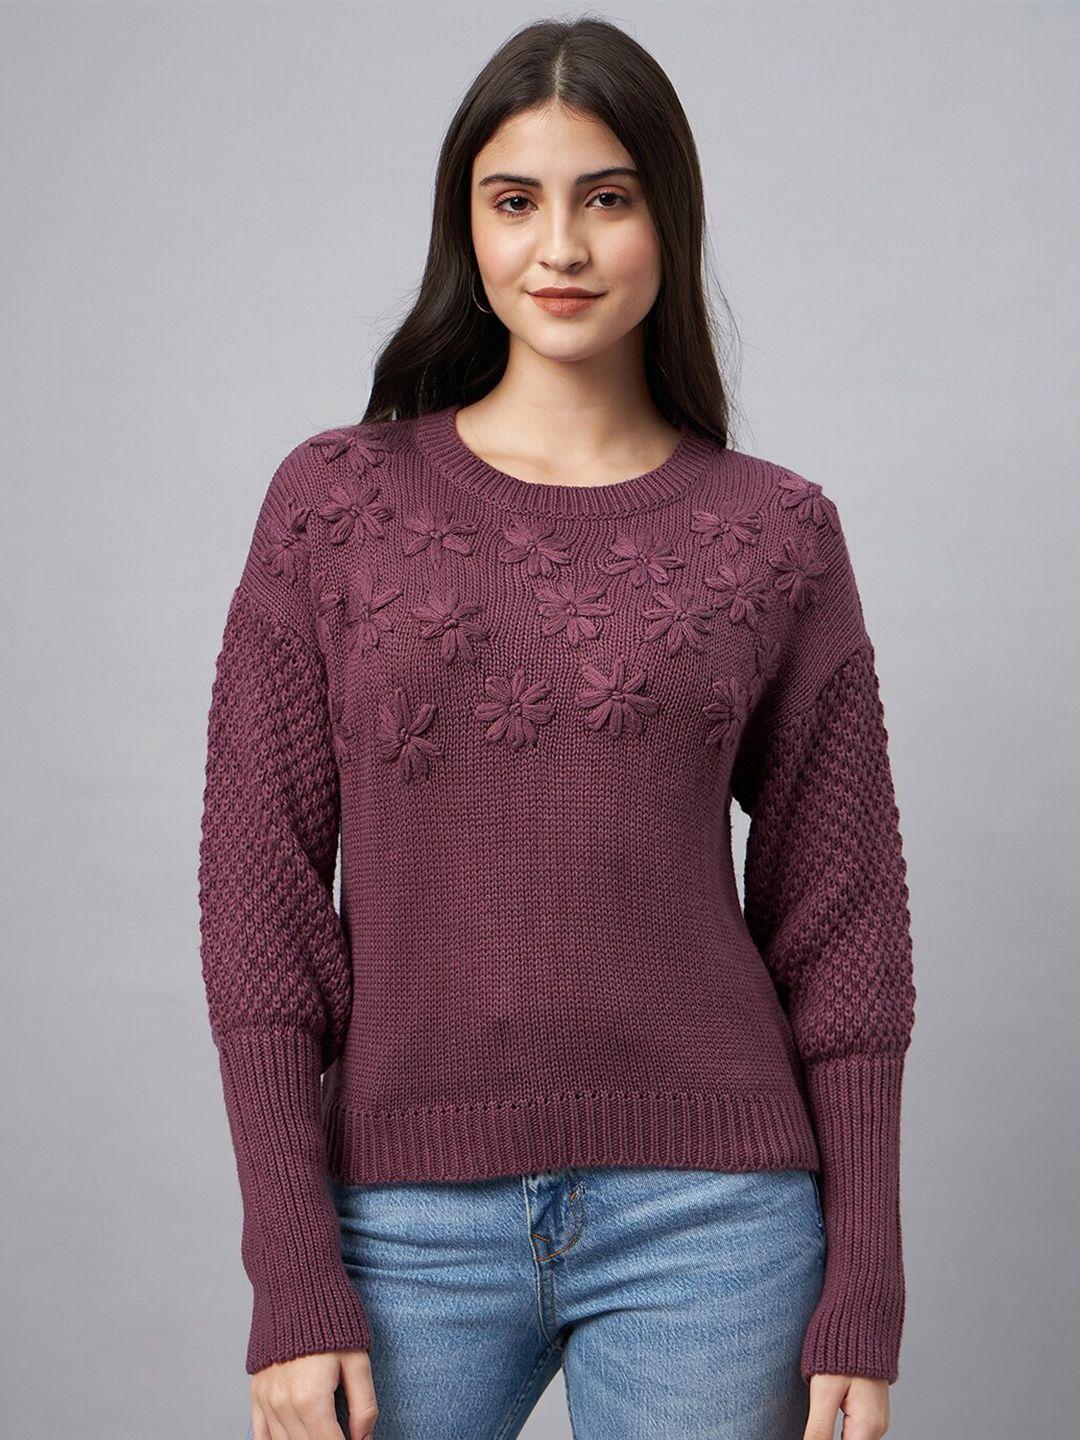 club york floral embroidered acrylic pullover